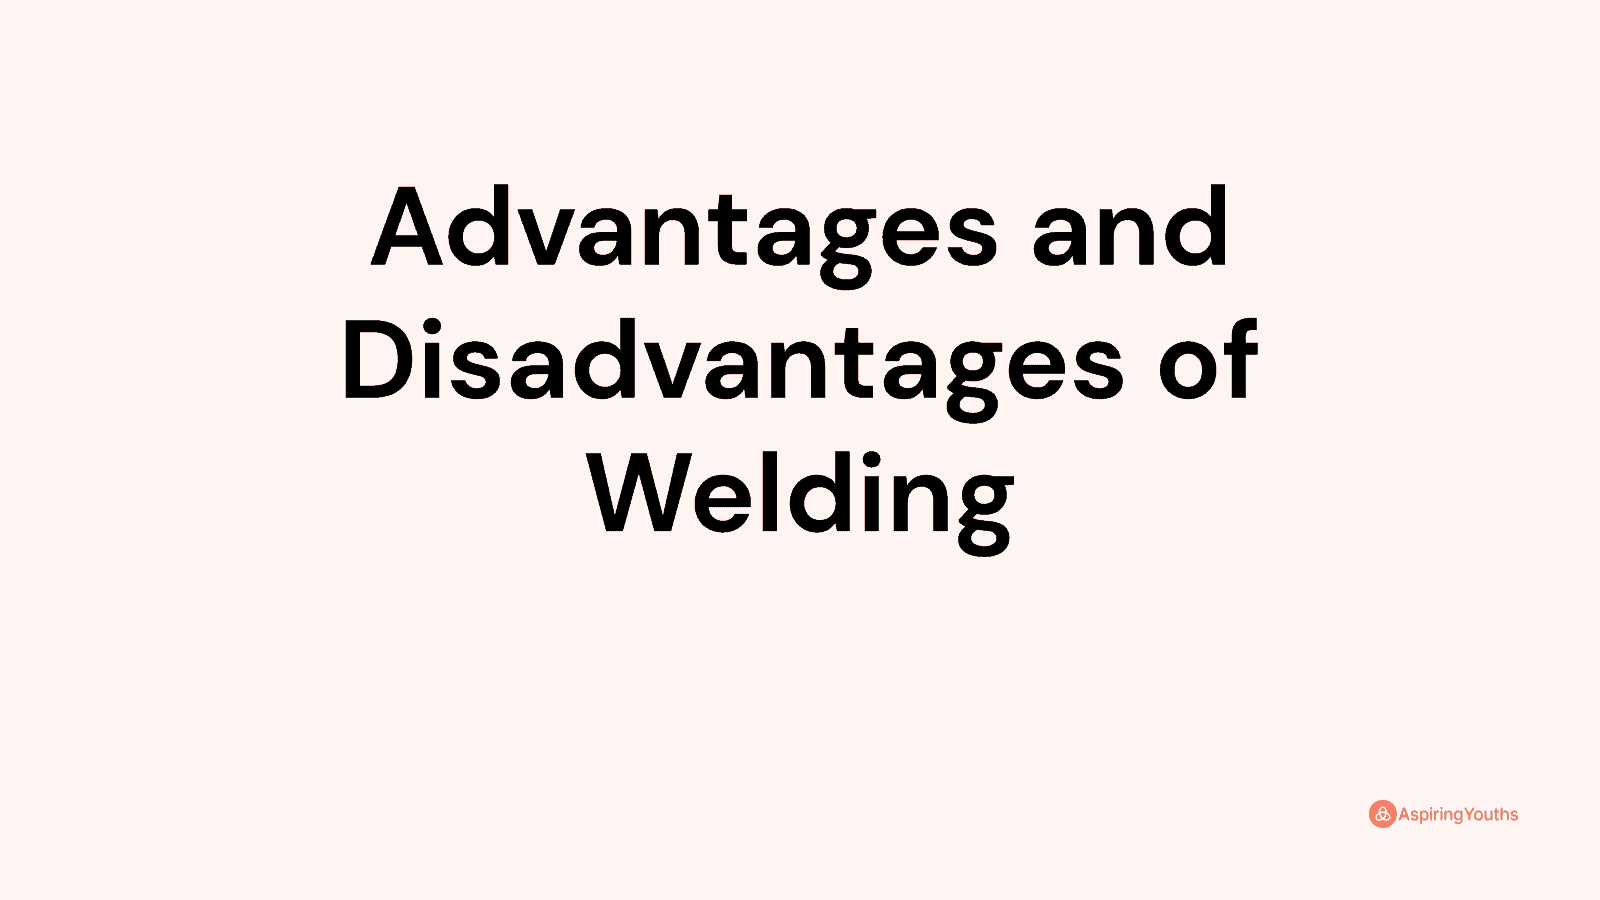 Advantages and disadvantages of Welding